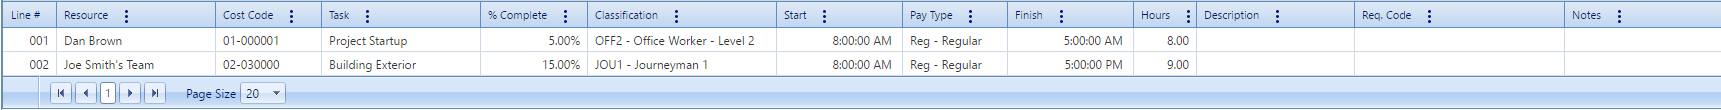 2. Daily Reports Timesheet Tab Table